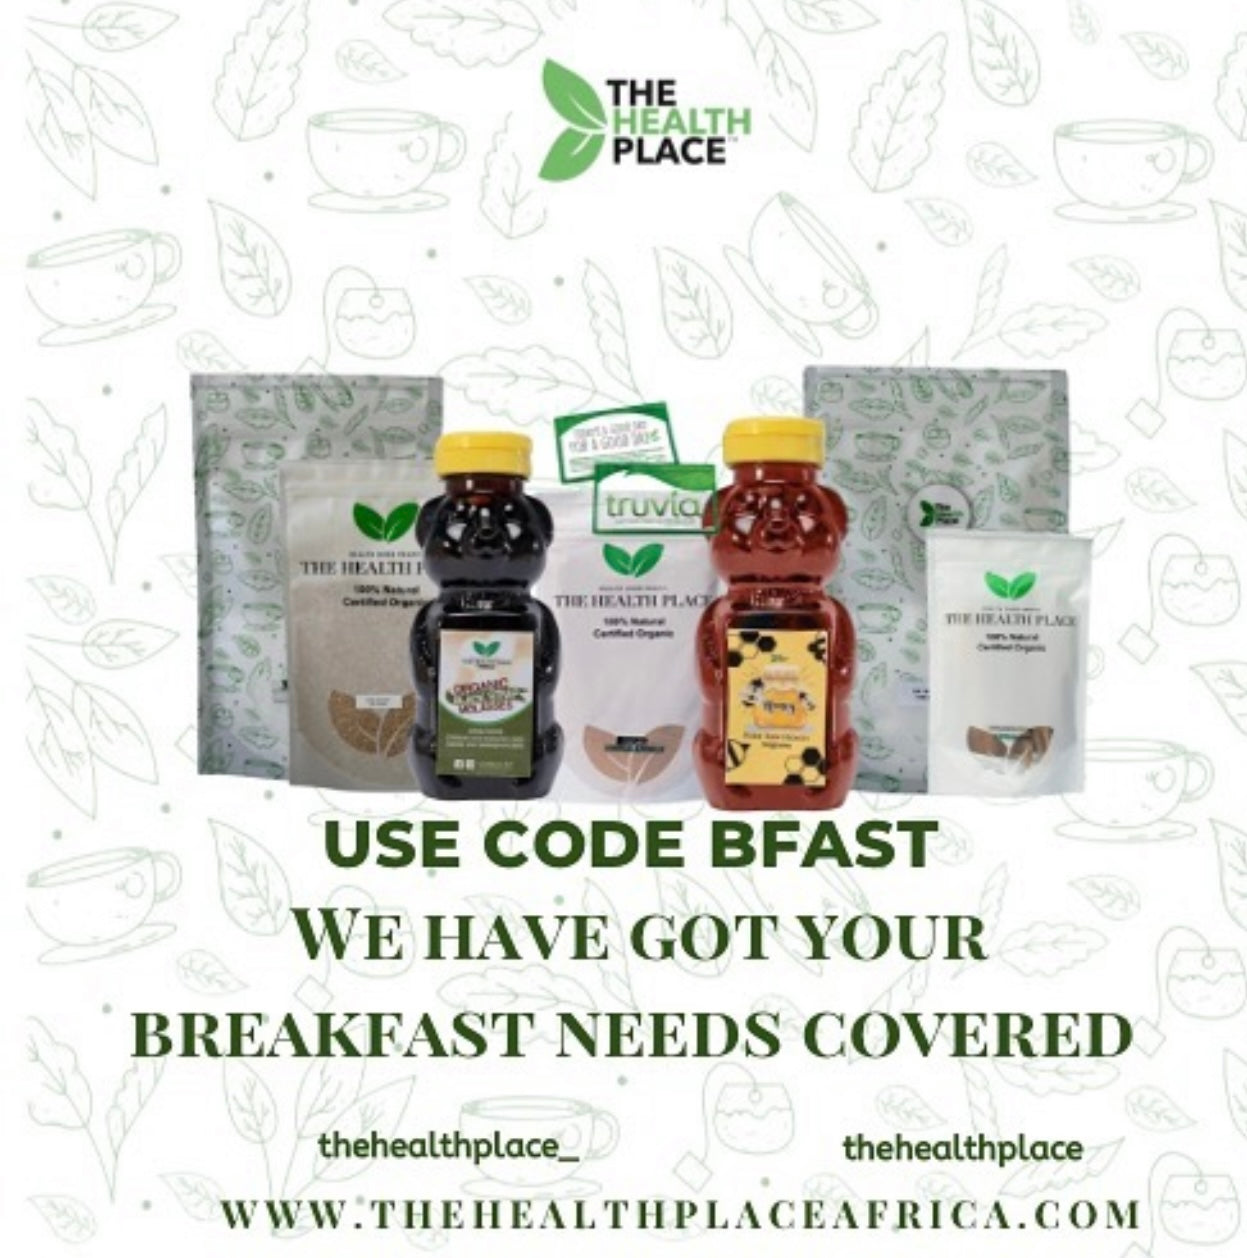 BREAKFAST BUNDLE - SAVE 10% OFF ANY 3 BREAKFAST PRODUCT